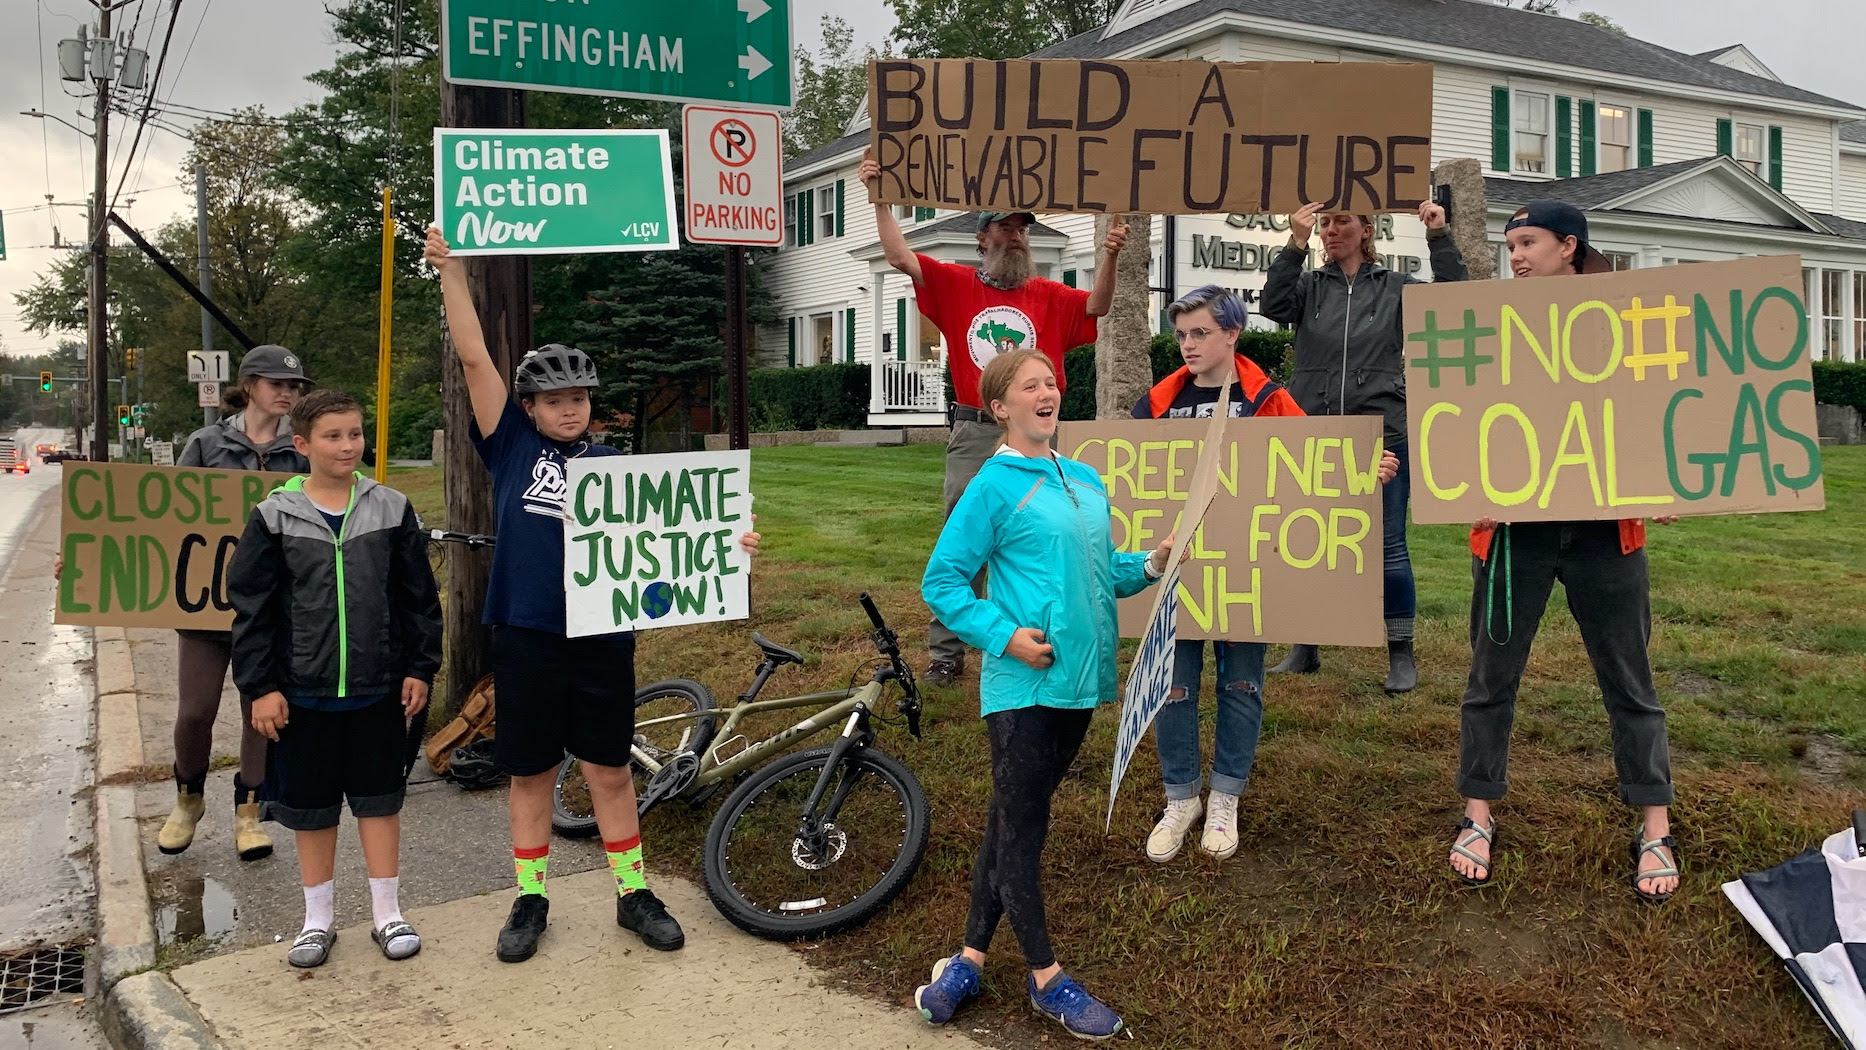 group of young people holding various cardboard signs that say No Coal No Gas, Green New Deal for NH, Build a Renewable Future, Climate Justice Now. They're in raincoats standing on a corner of a street.